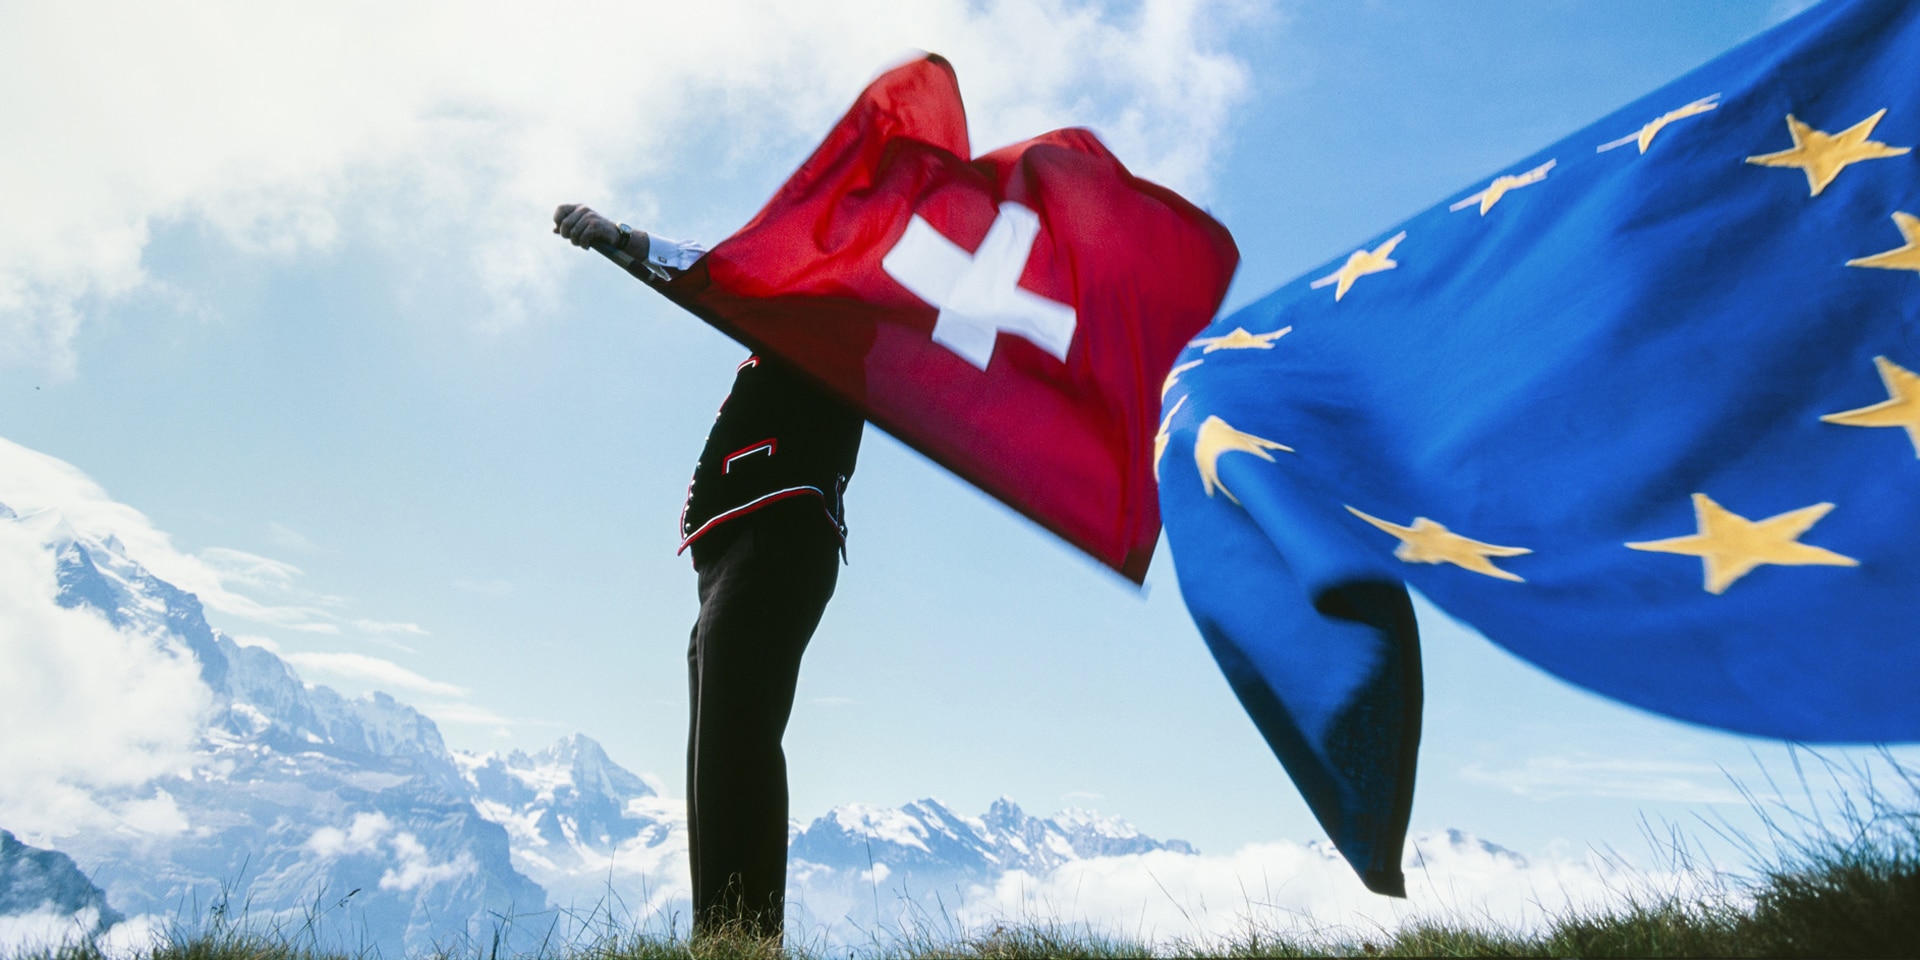 A flag-thrower waving the Swiss flag in one hand and the EU flag in the other against the backdrop of the Bernese Alps.